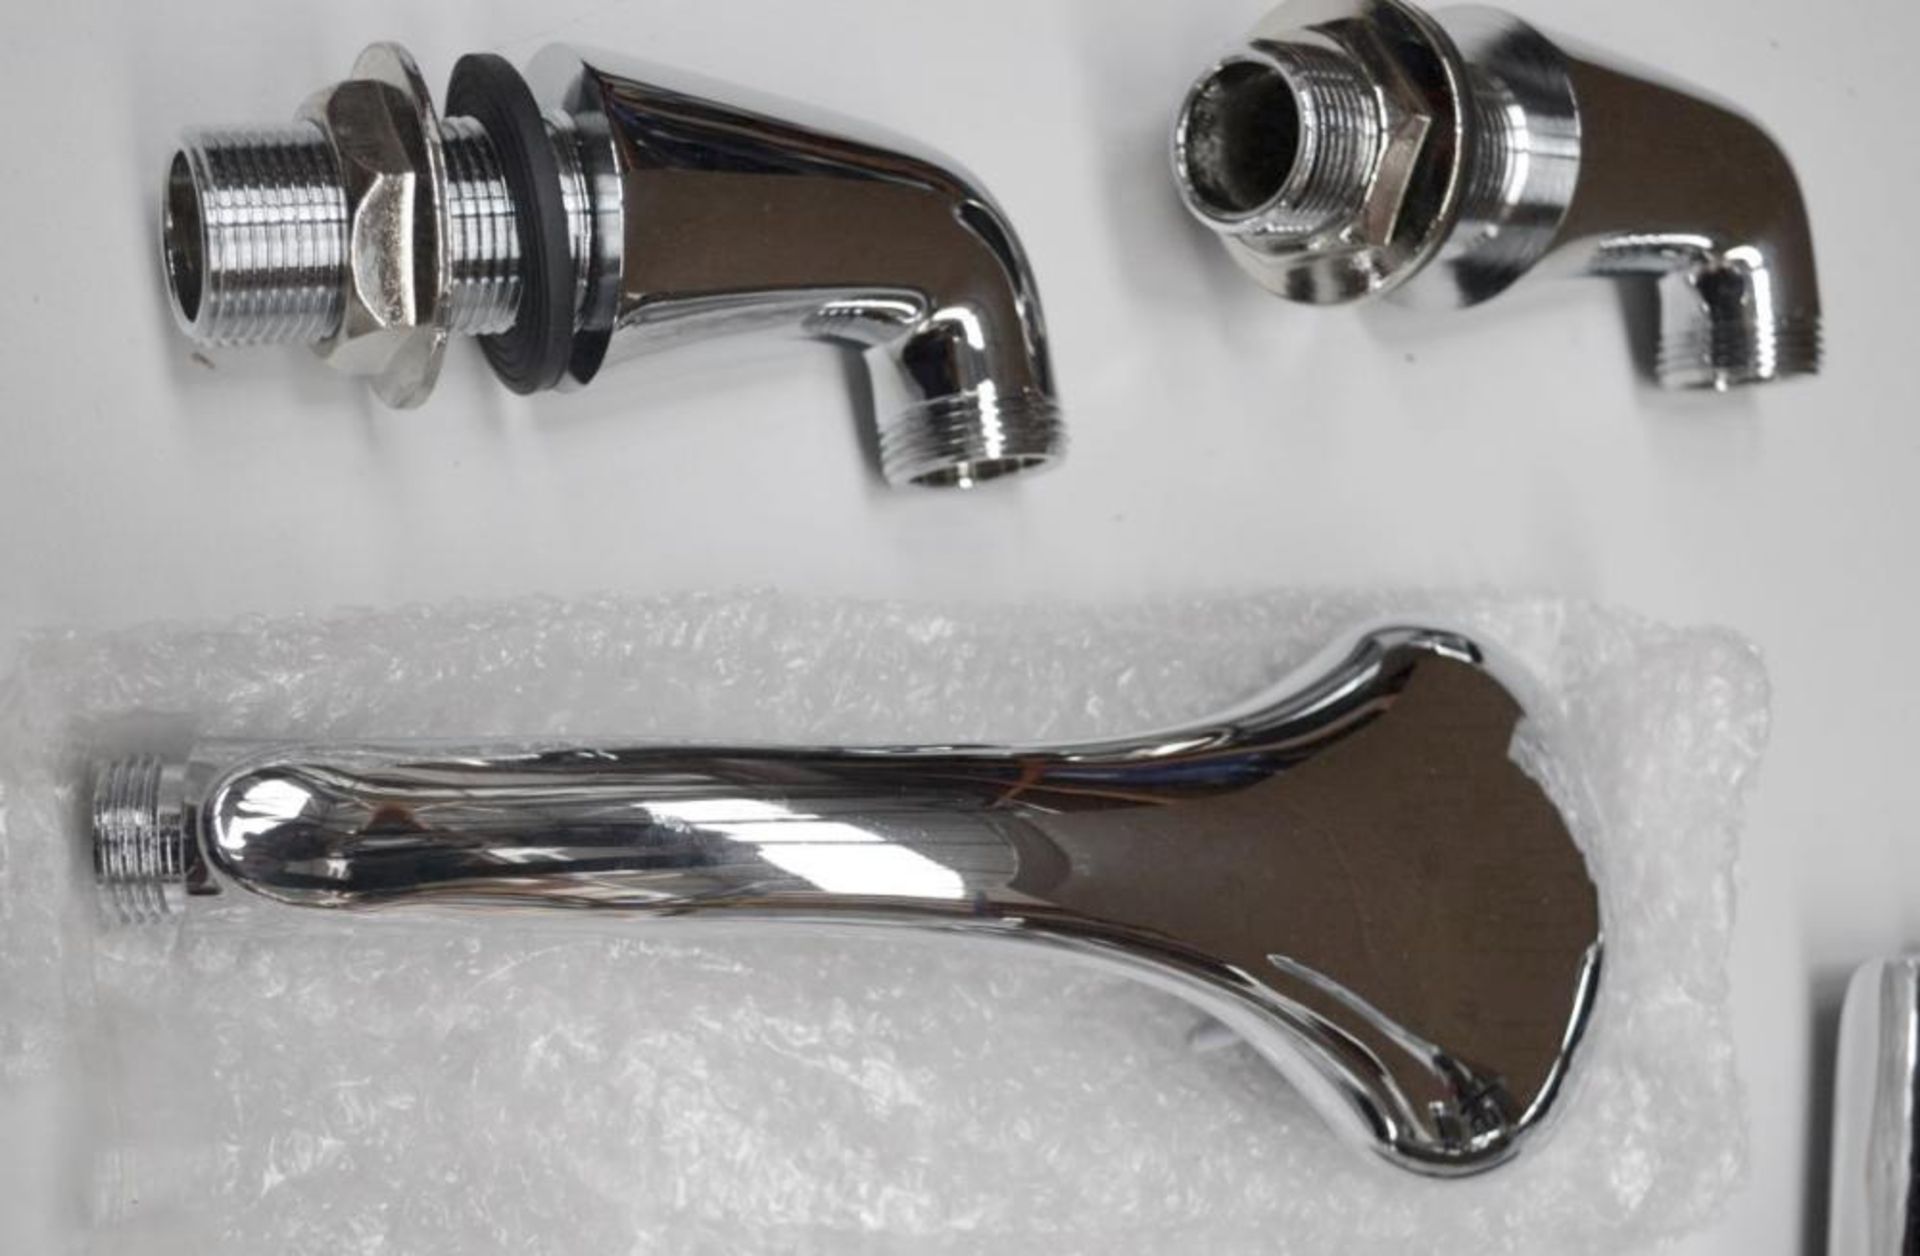 1 x PULSE Single Lever Bath Shower Mixer Tap In Chrome (Model: 112G2) - Ref: M188 - CL190 - Unused B - Image 4 of 7